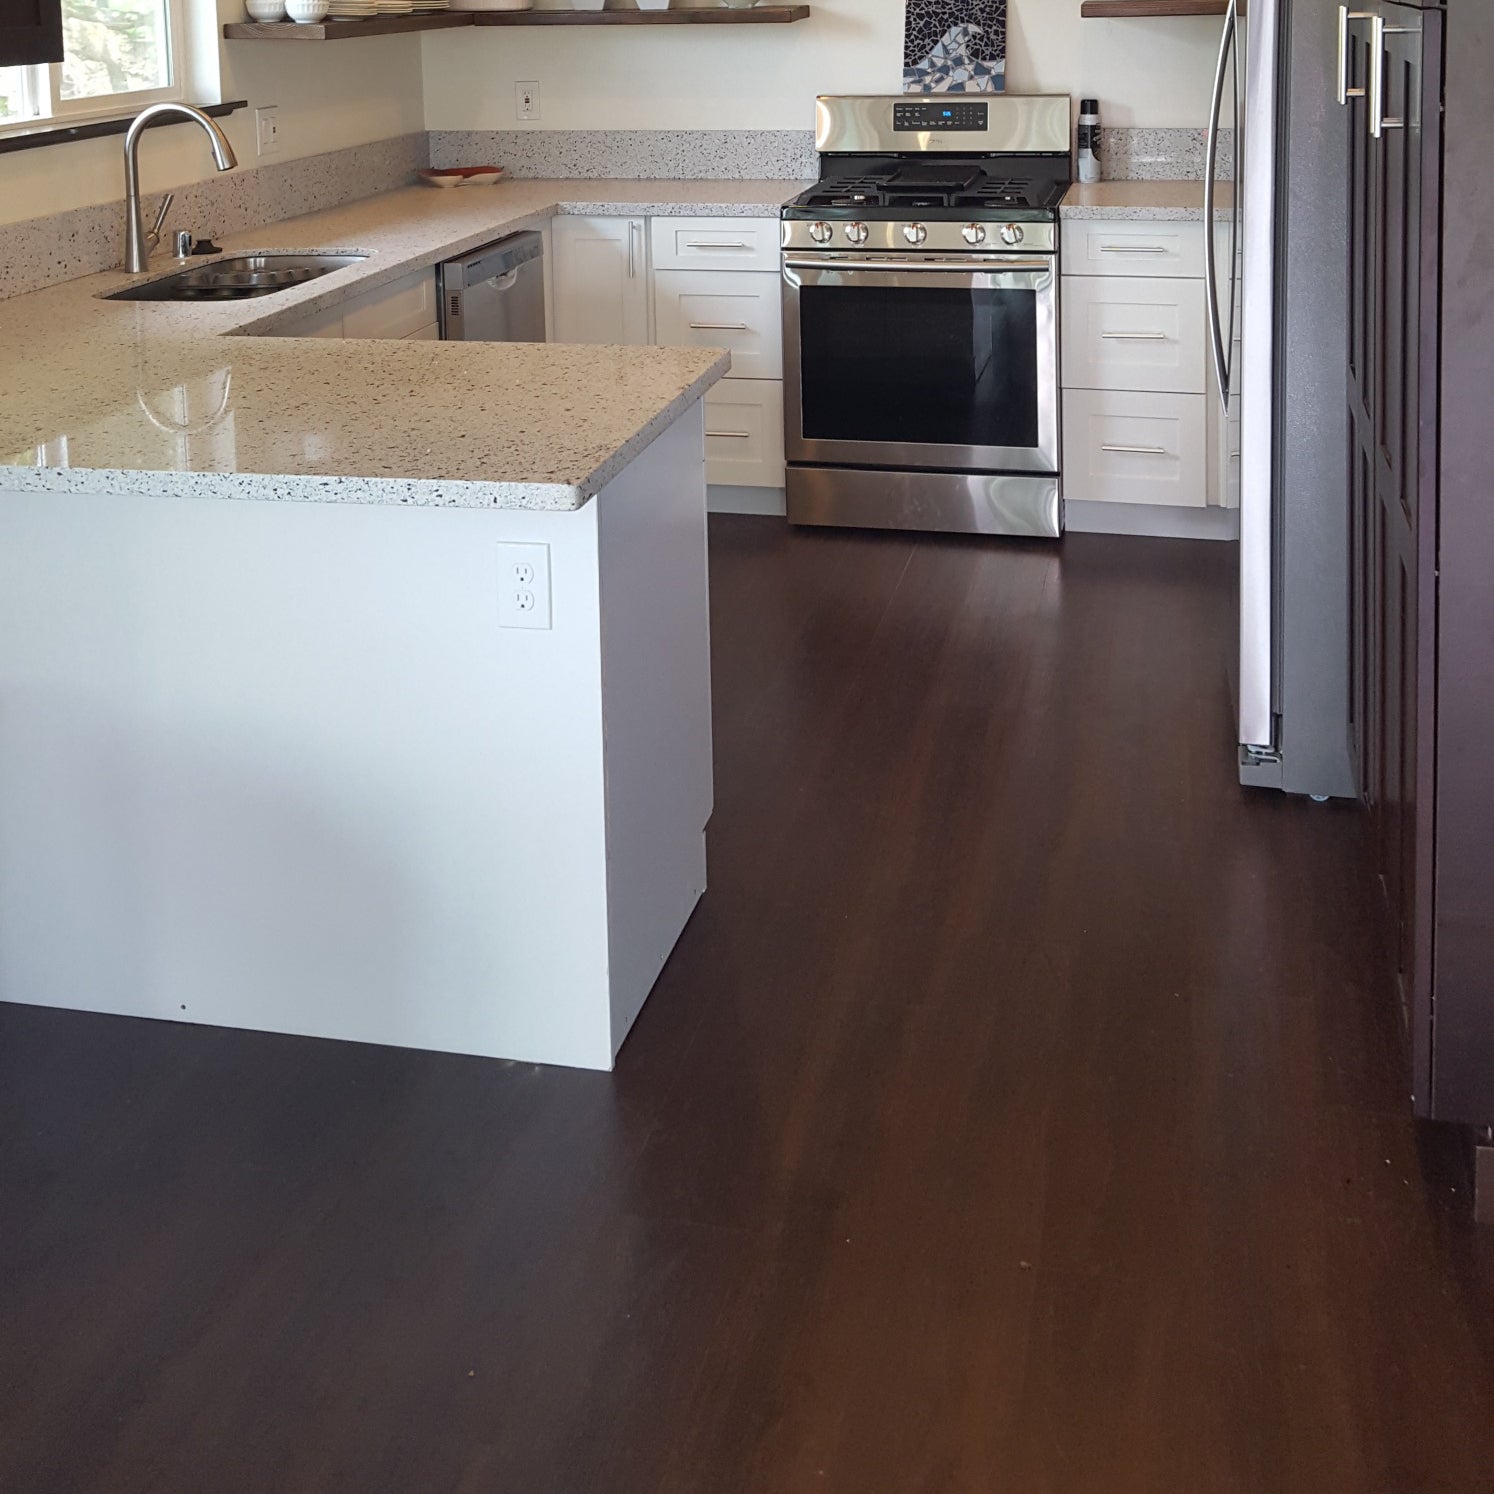 Can You Put a Refrigerator or Heavy Furniture on Vinyl Plank Flooring?